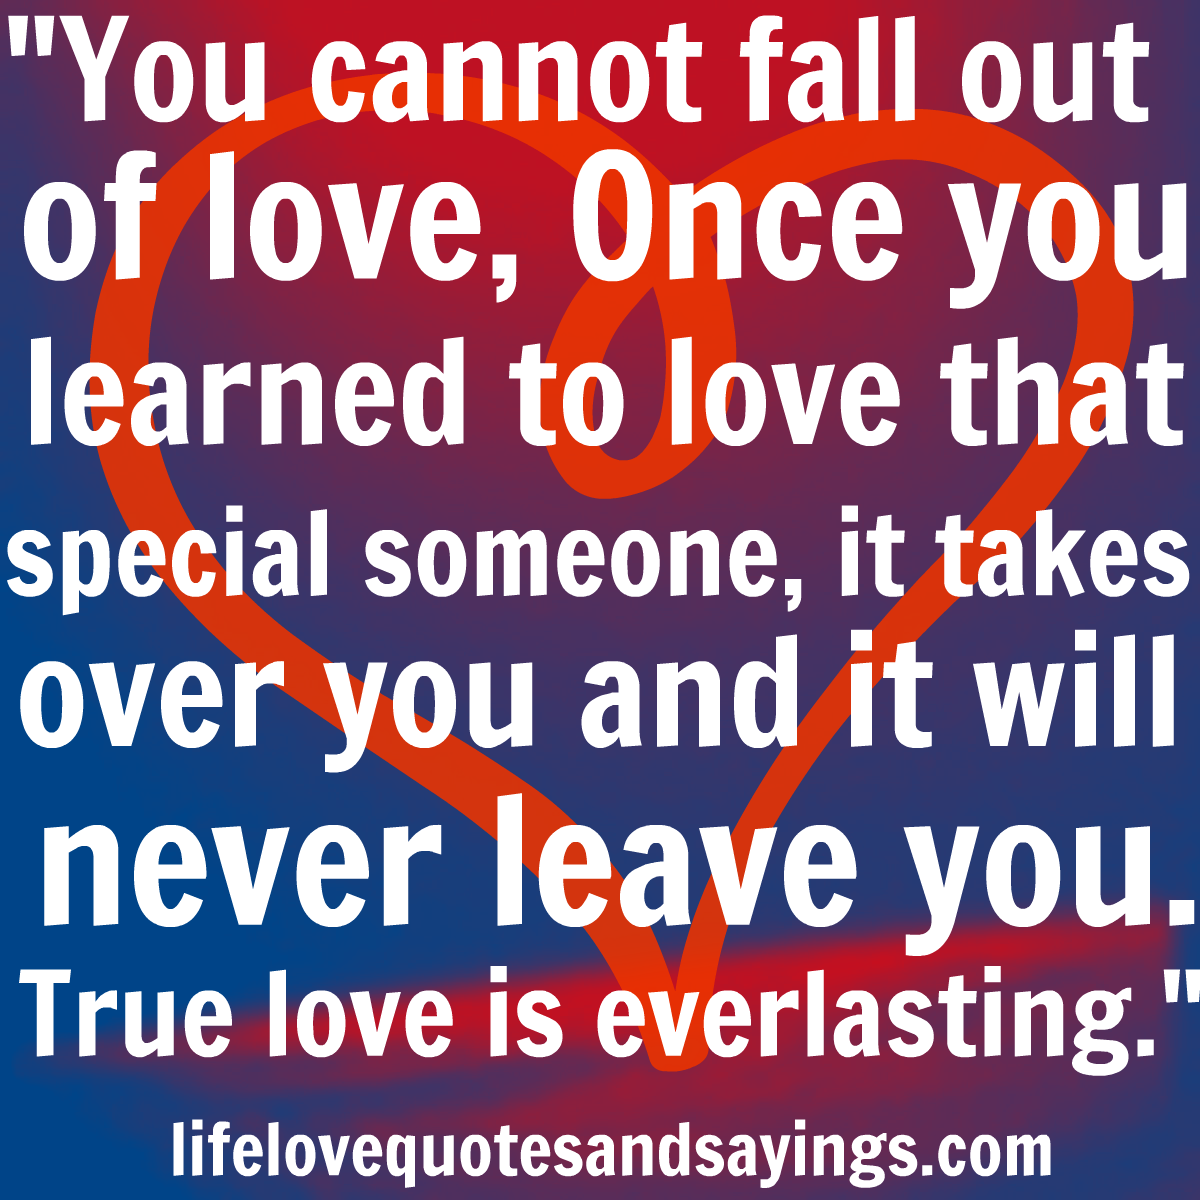  Everlasting Love Quotes  And Sayings  QuotesGram